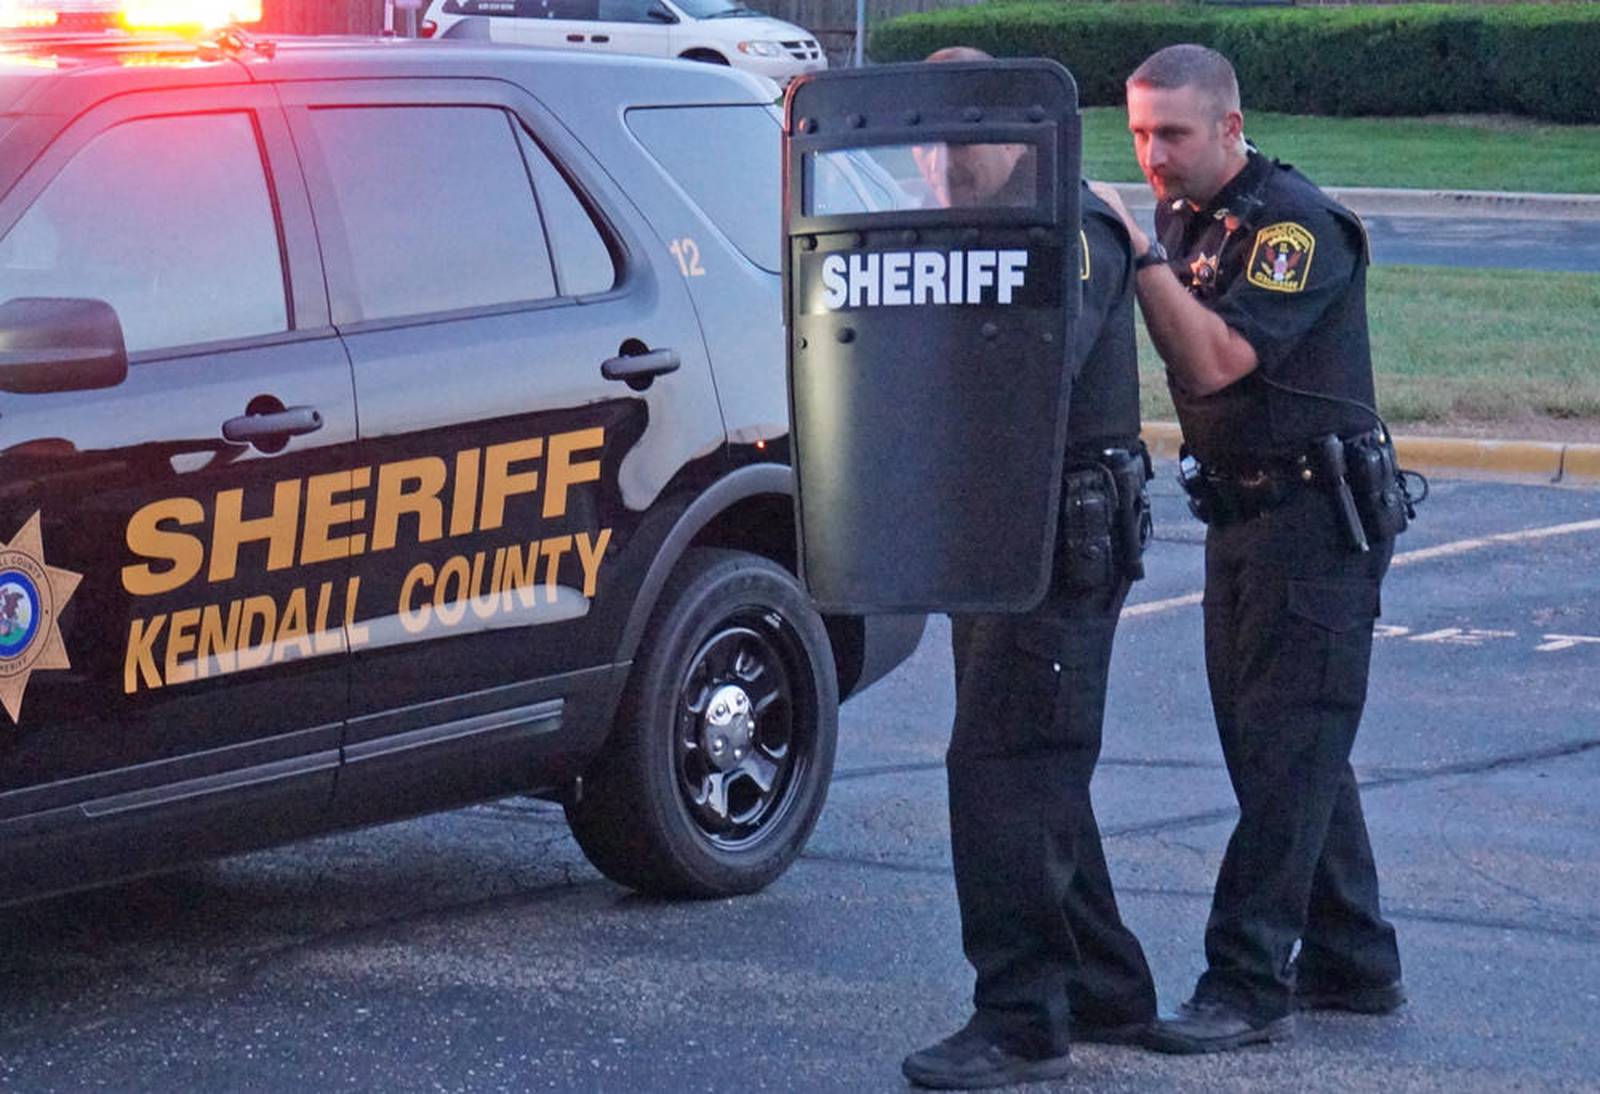 Kendall County Sheriff S Office Reports No Excessive Use Of Force In 51 Separate Incidents In